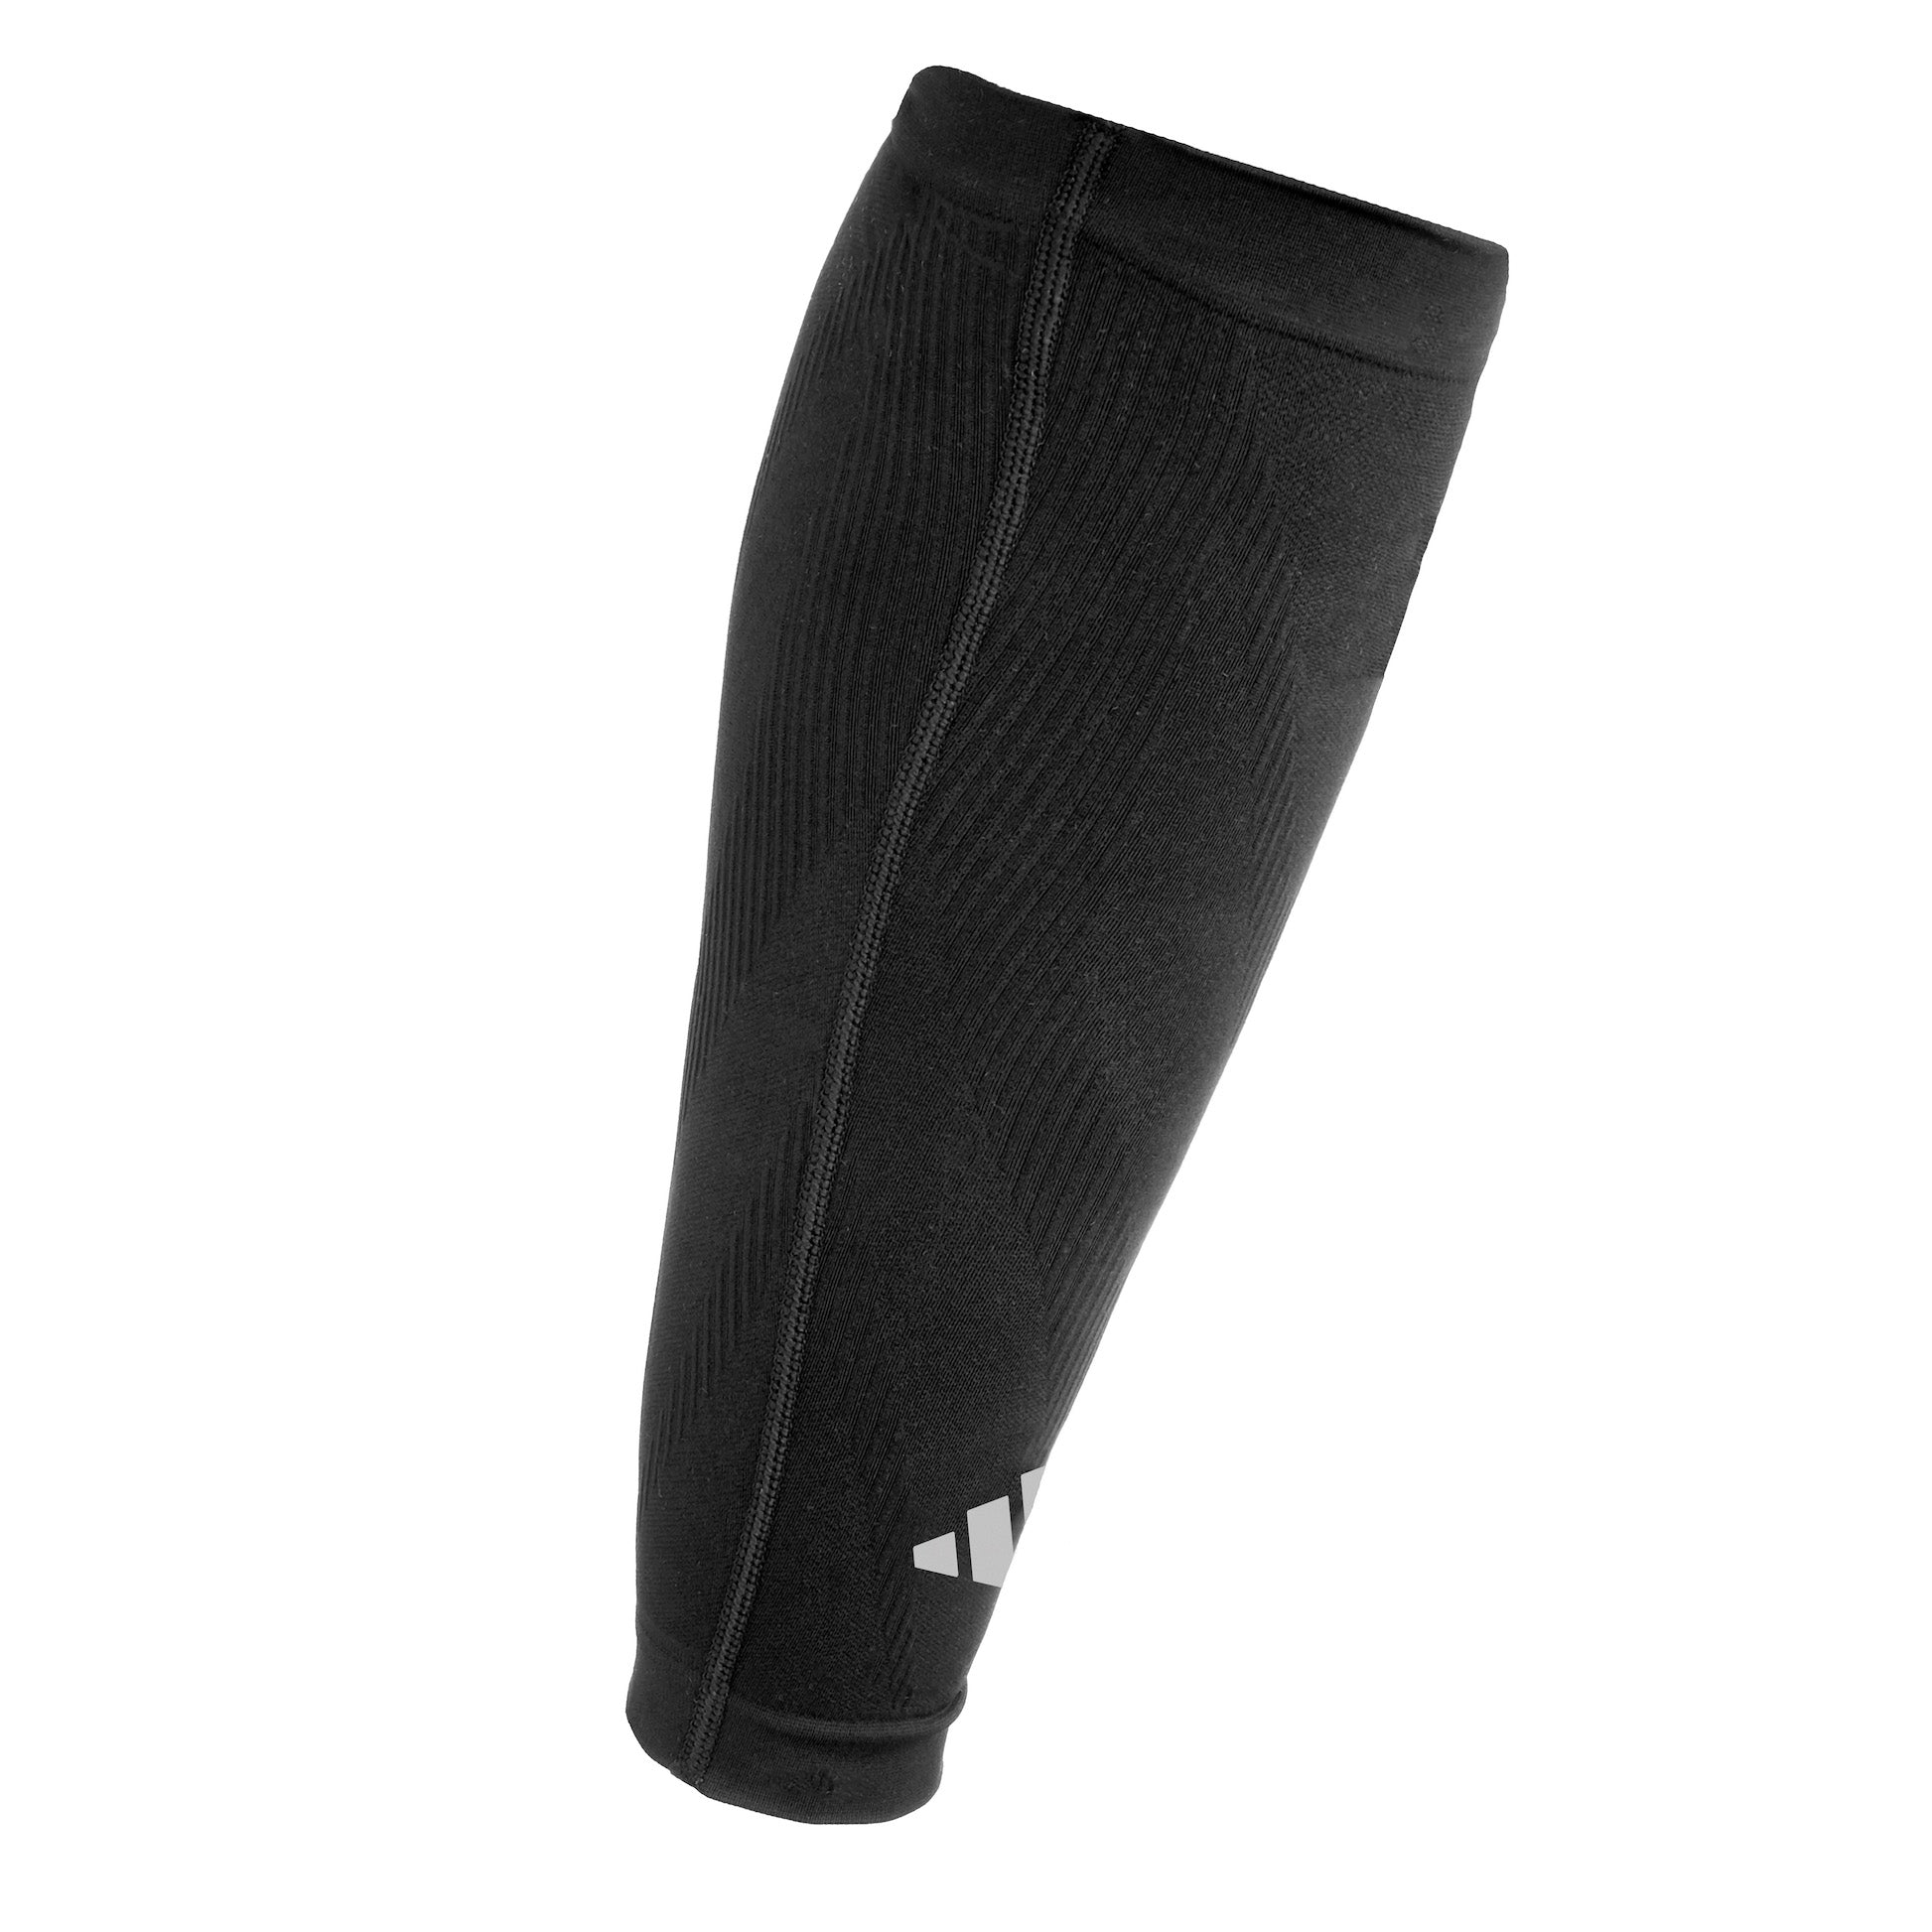  Adidas Calf Compression Sleeves For Women And Men